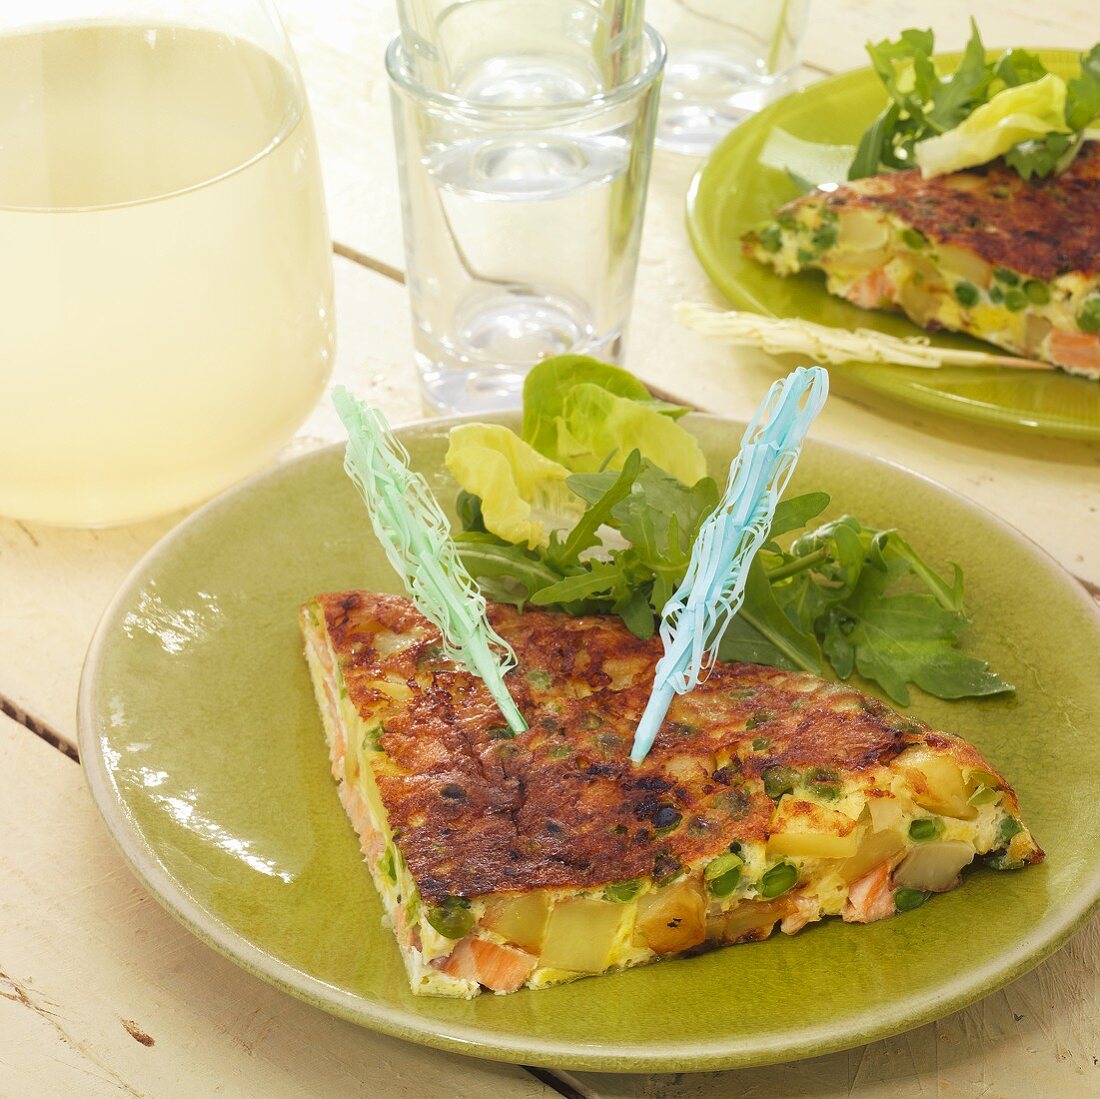 Vegetable and salmon tortilla